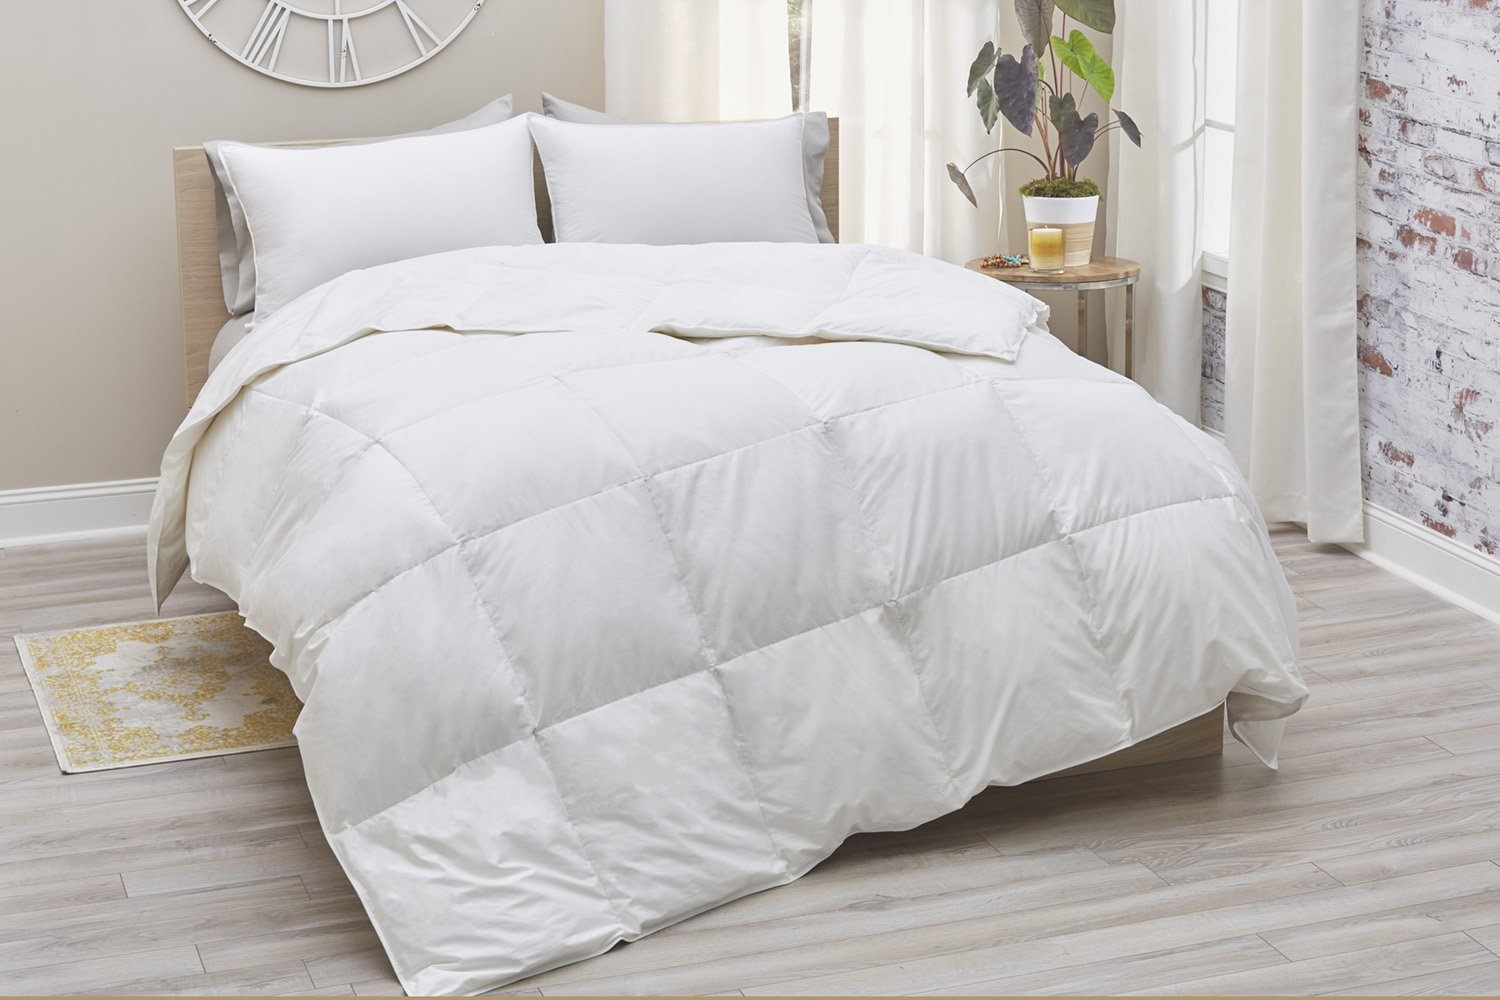 PlushBed Pure White Goose Down Comforter